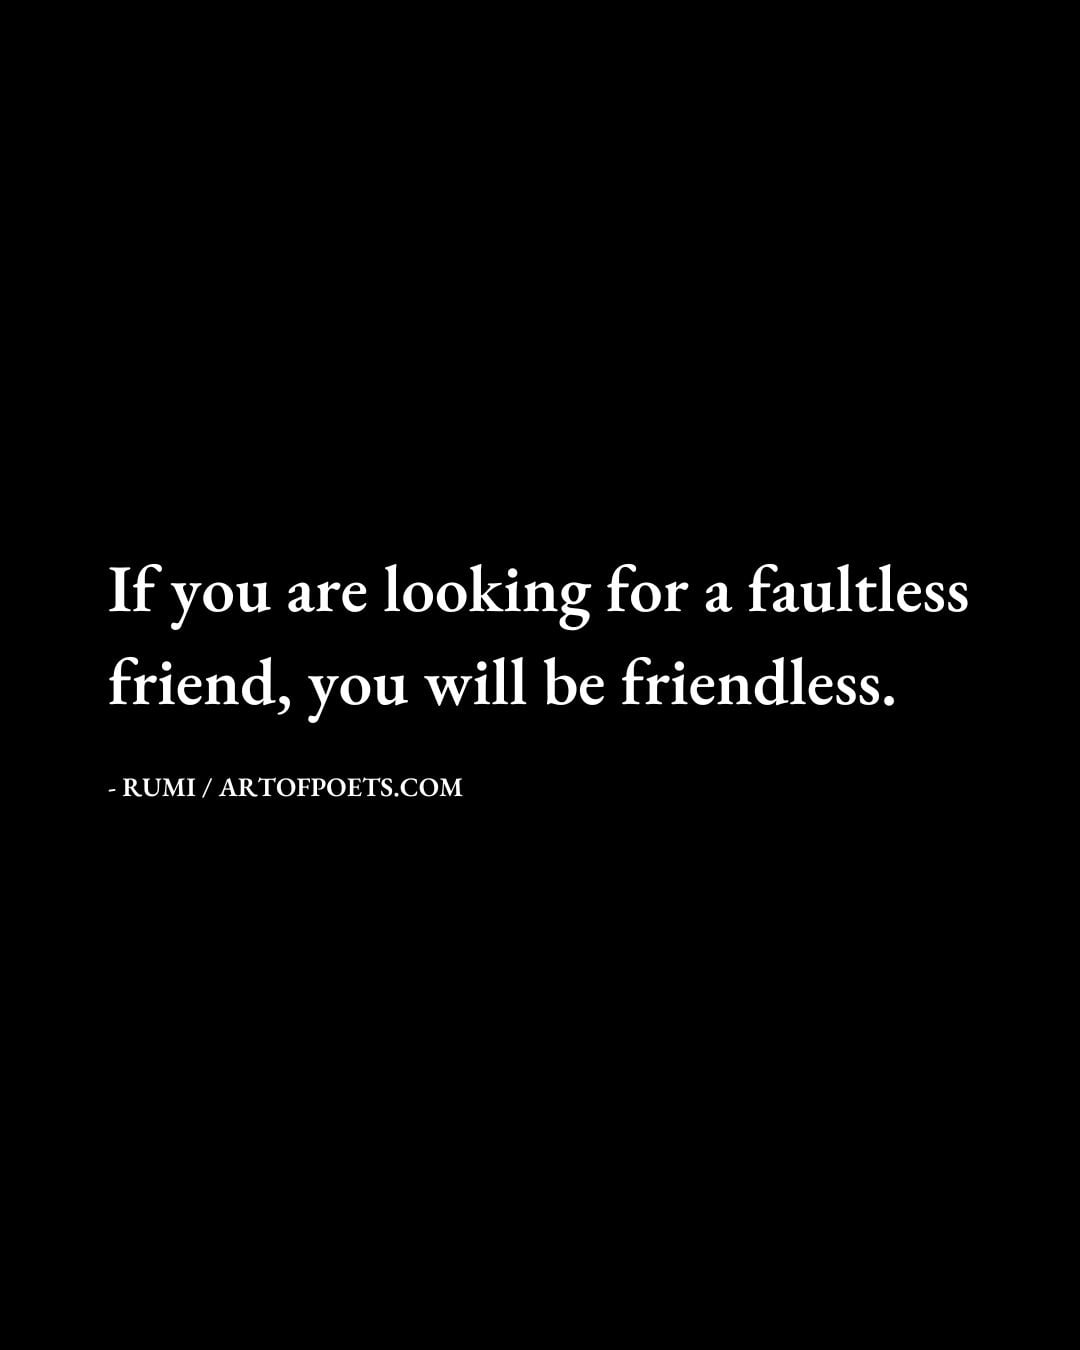 If you are looking for a faultless friend you will be friendless. Rumi